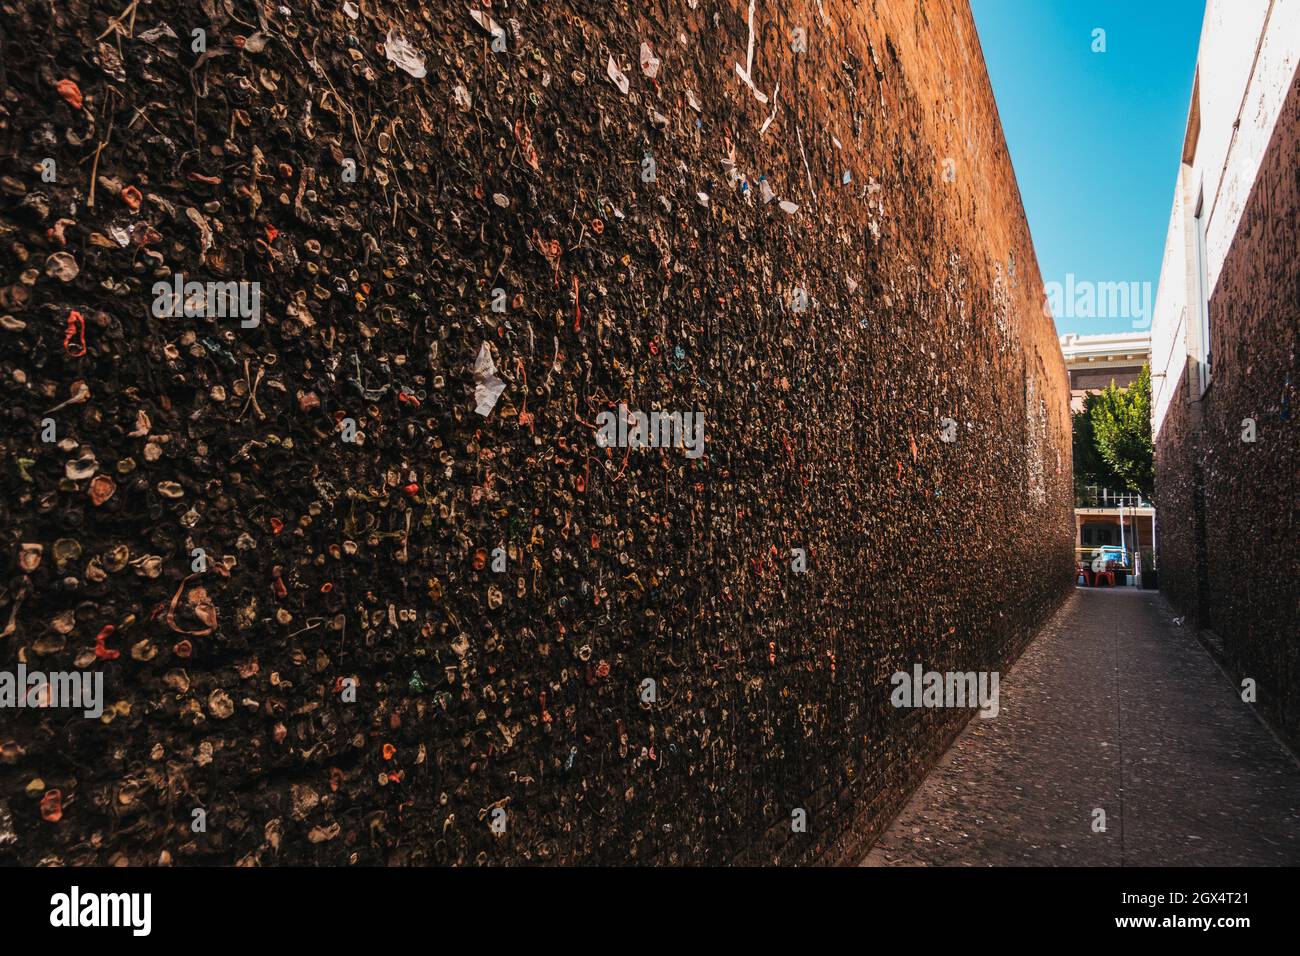 Bubblegum Alley, a narrow pedestrian way in San Luis Obispo, CA where chewed gum accumulated on the walls, now a famous tourist attraction Stock Photo